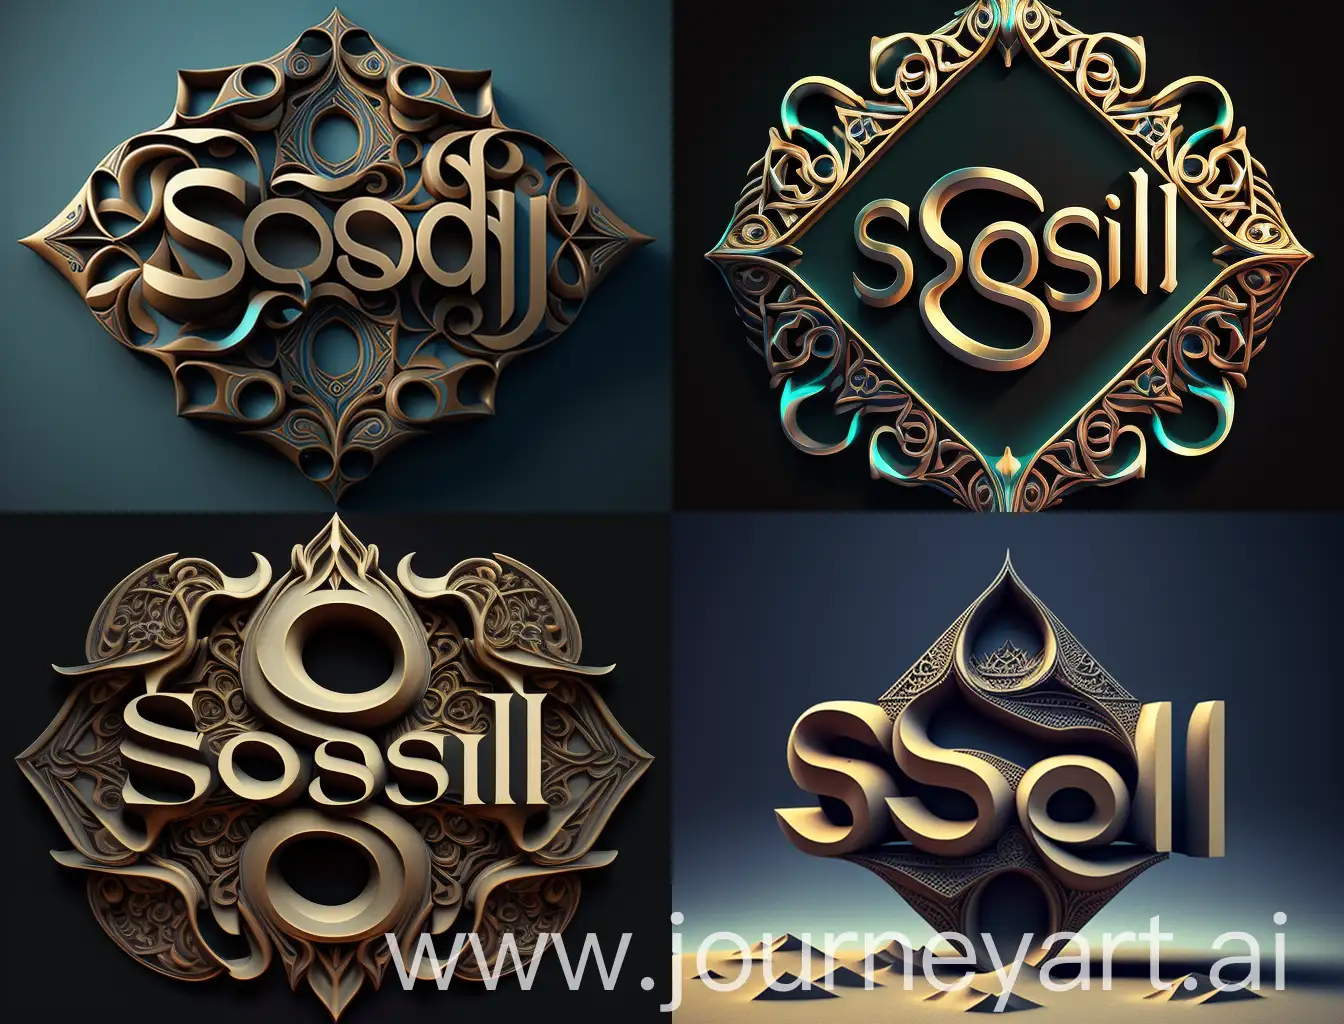 To use the signs and symptoms of a Persian schoolA simple and stylish 3d logo with the word soshi in the middle is used from Persian spirituality and Iranian poets